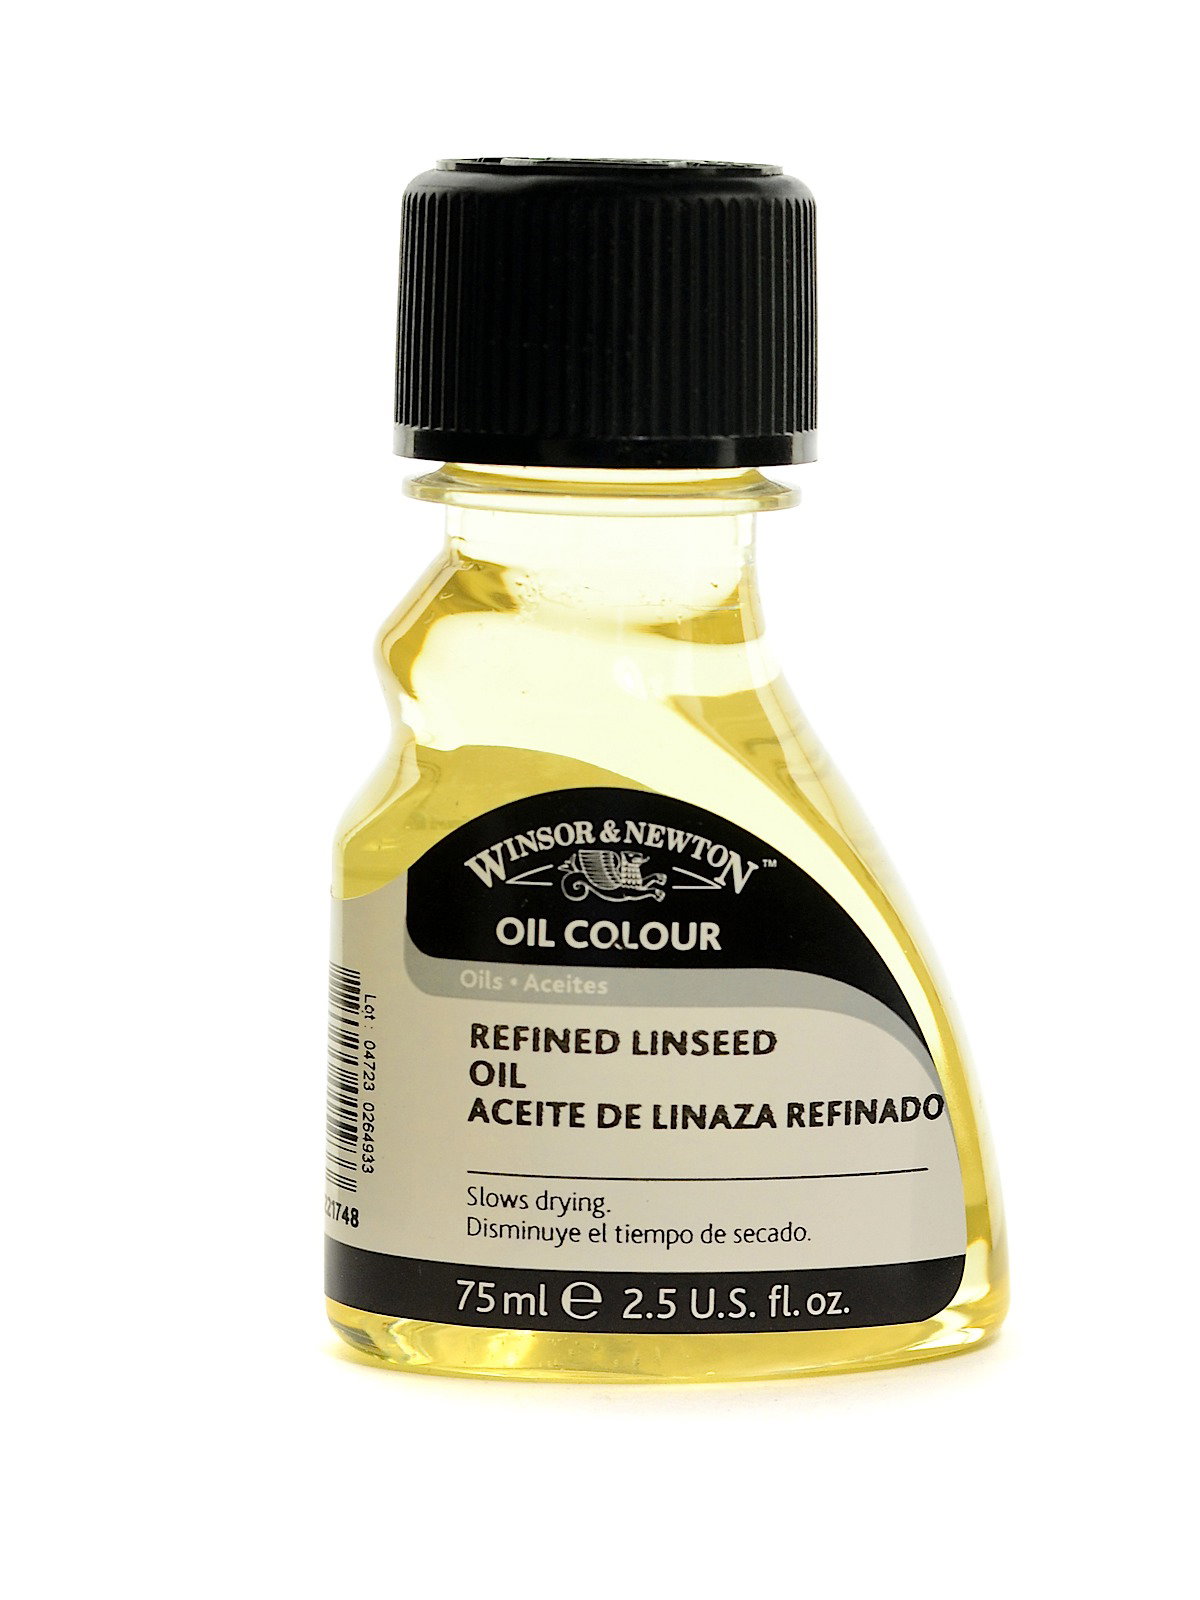 Oils - Winsor & Newton Oil Colour Oil, Thickened Linseed Oil, 75ml